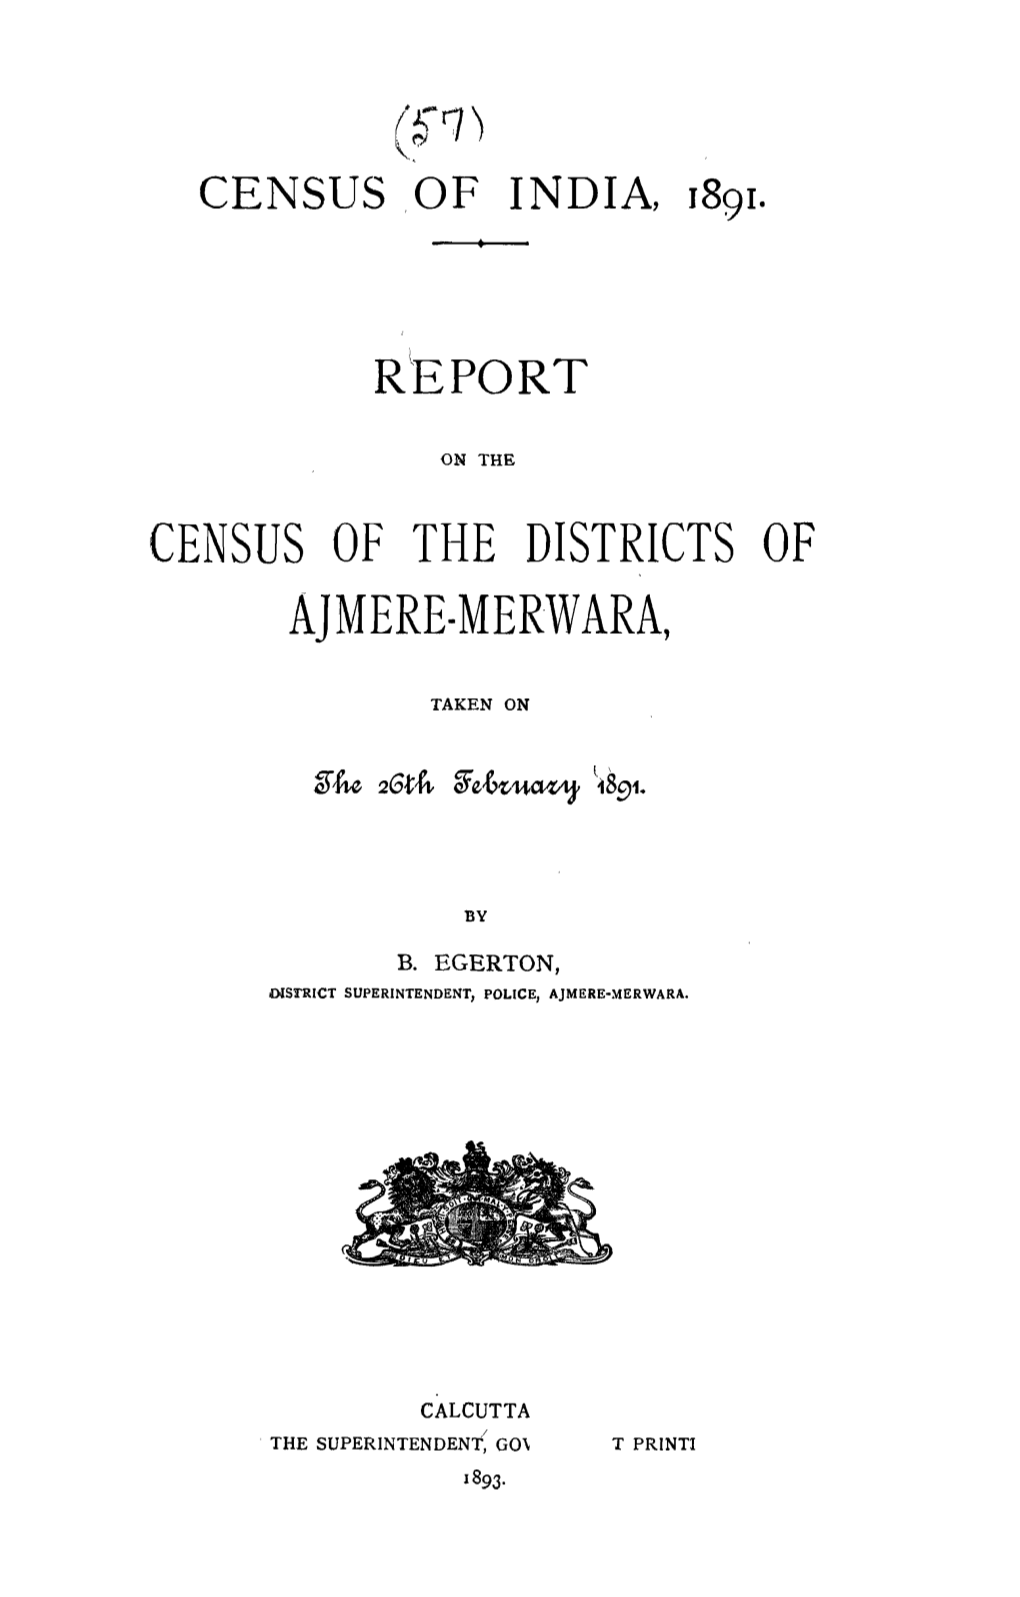 Report on the Census of the Distribution of Ajmere-Merwara